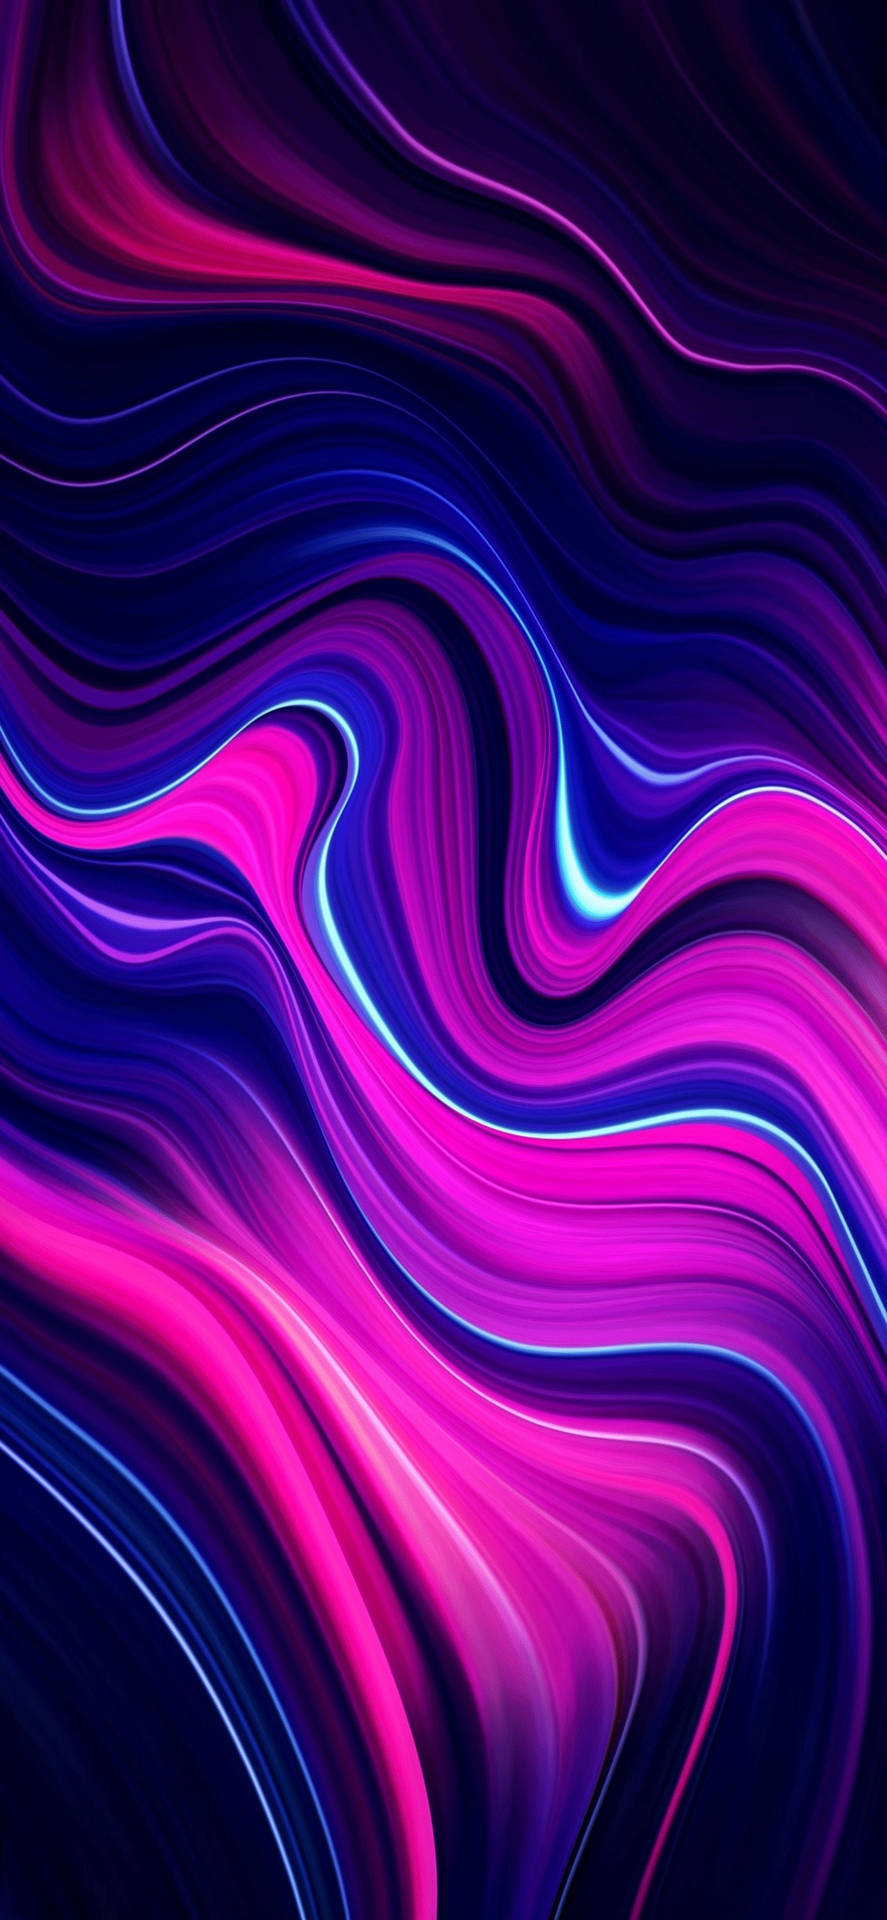 Cool Iphone 11 Purple And Blue Waves Background